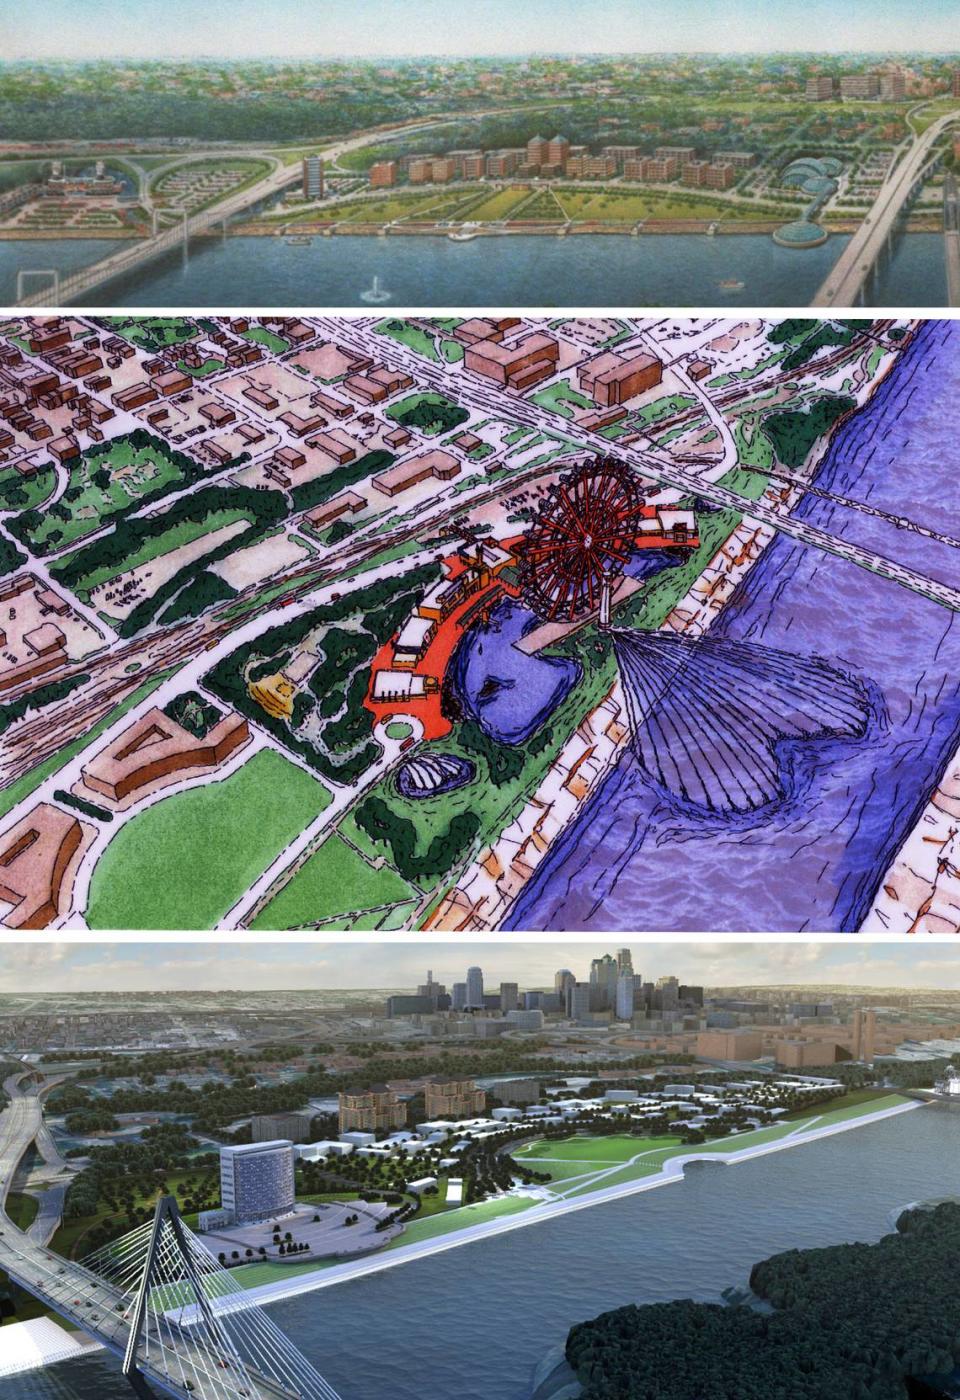 Several renderings have been published in The Star for proposed development along Kansas City’s riverfront. The top shows a plan envisioned in 1997, when Berkley Riverfront Park was being developed. The middle shows a plan put forth in 2007 by then-mayoral candidate Stan Glazer that would feature a giant Ferris wheel. The bottom shows a plan centered around offices for the federal Government Services Administration.